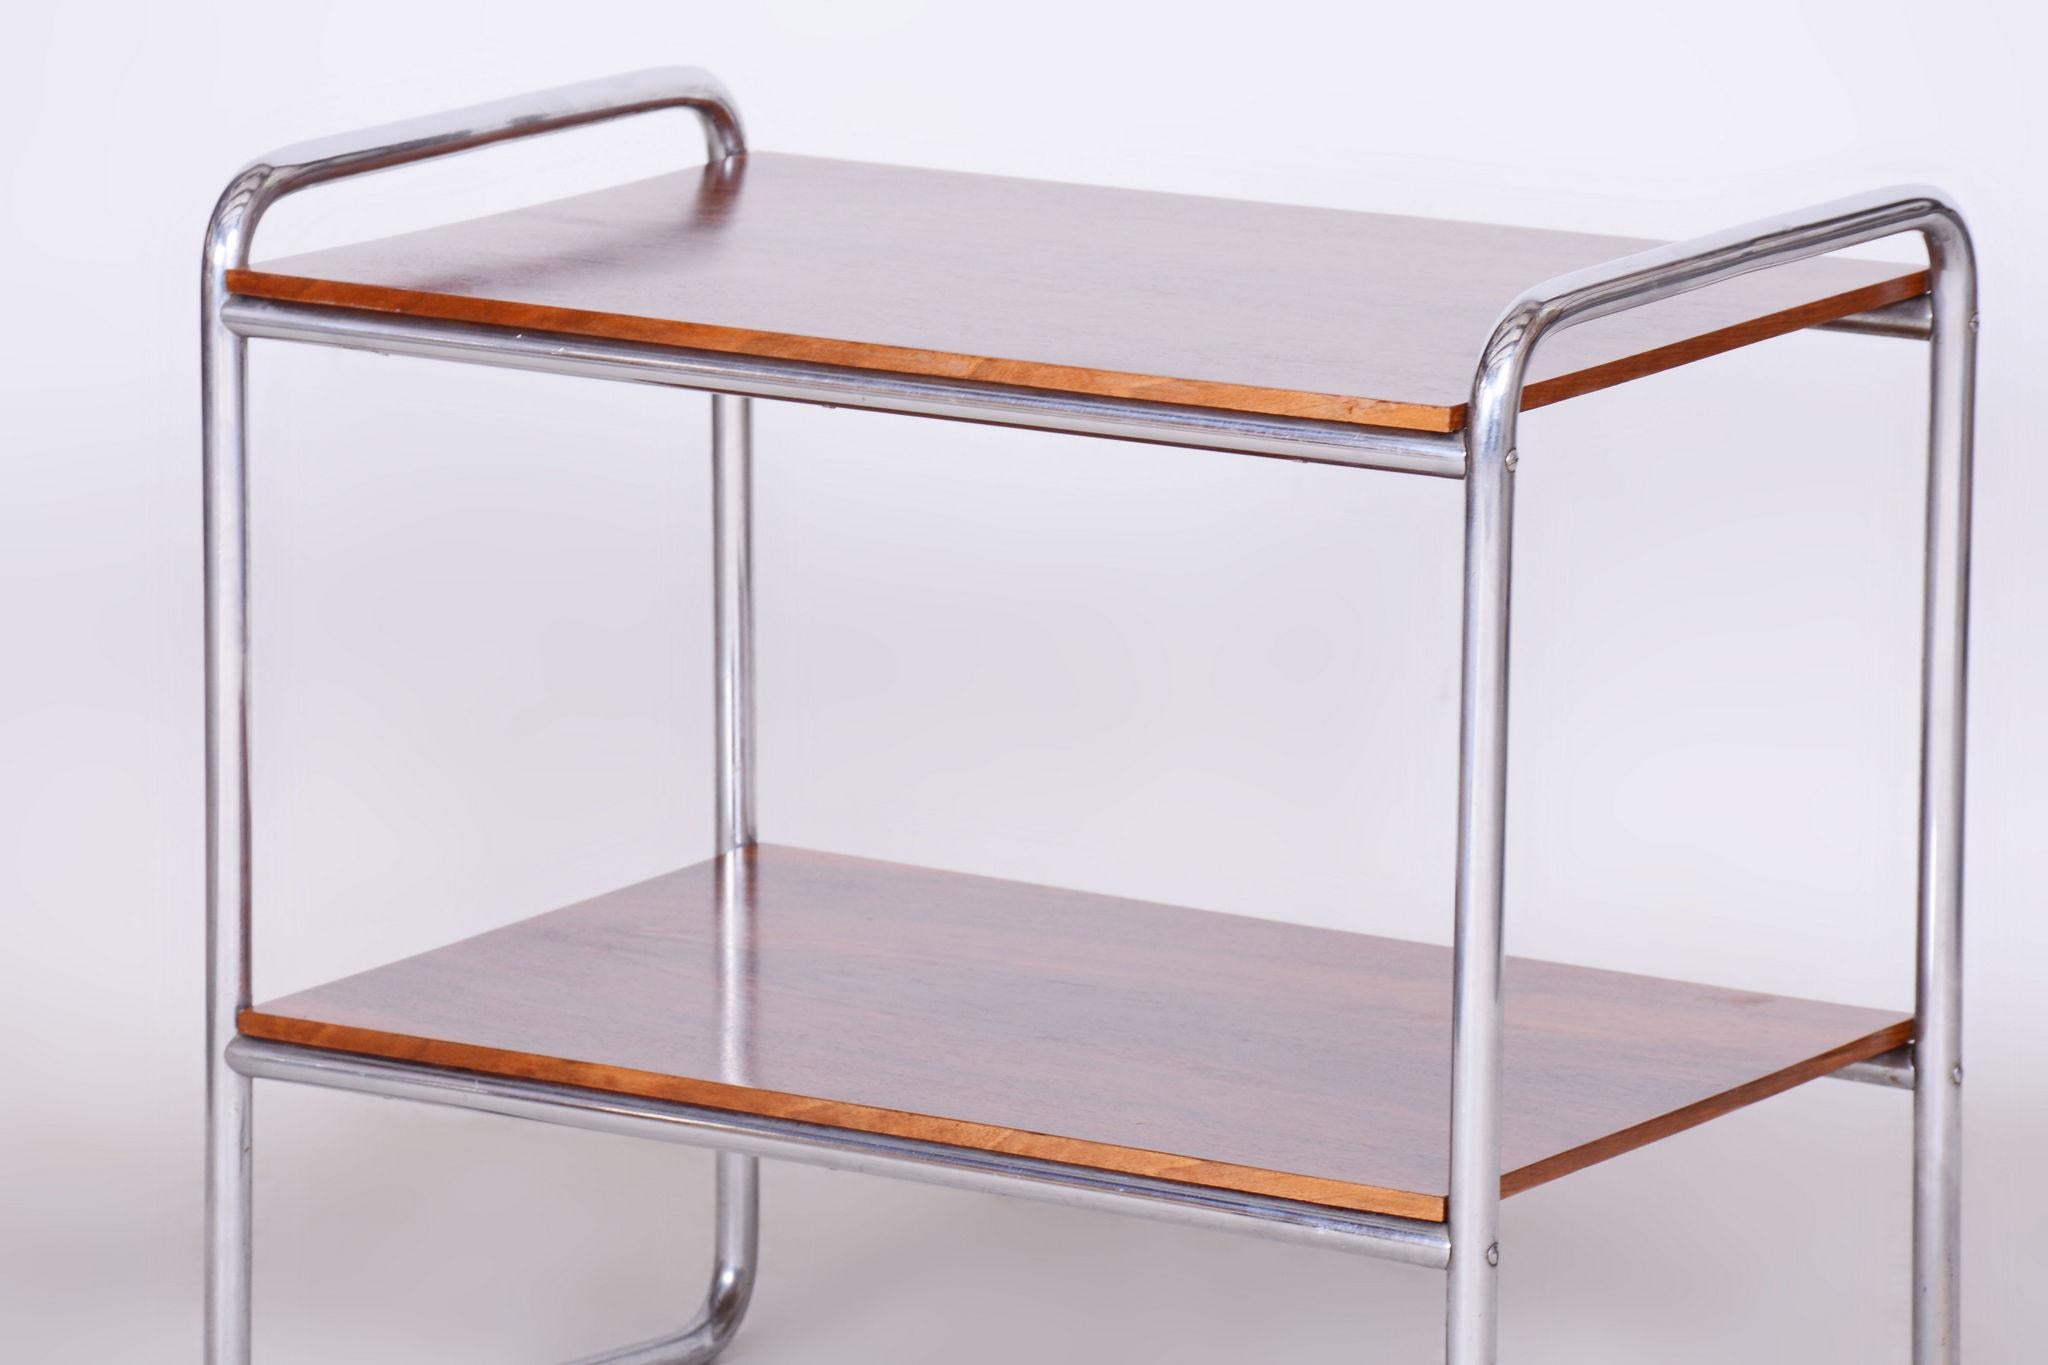 Restored Bauhaus Side Table, Walnut, Chrome-Plated Steel, Czech, 1930s In Good Condition For Sale In Horomerice, CZ